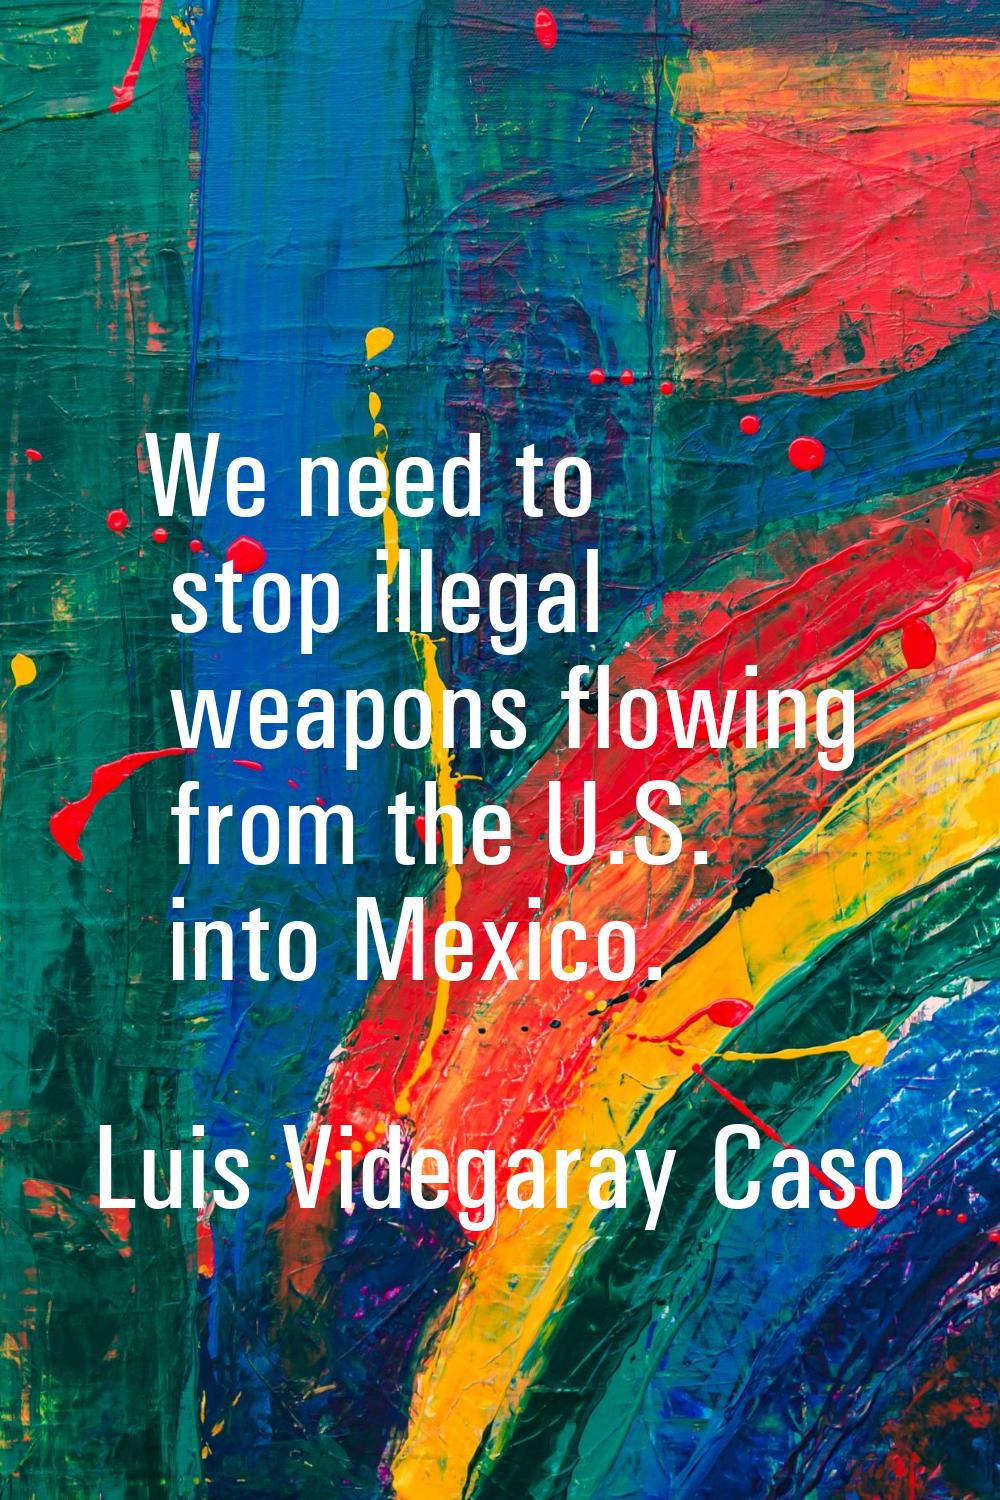 We need to stop illegal weapons flowing from the U.S. into Mexico.